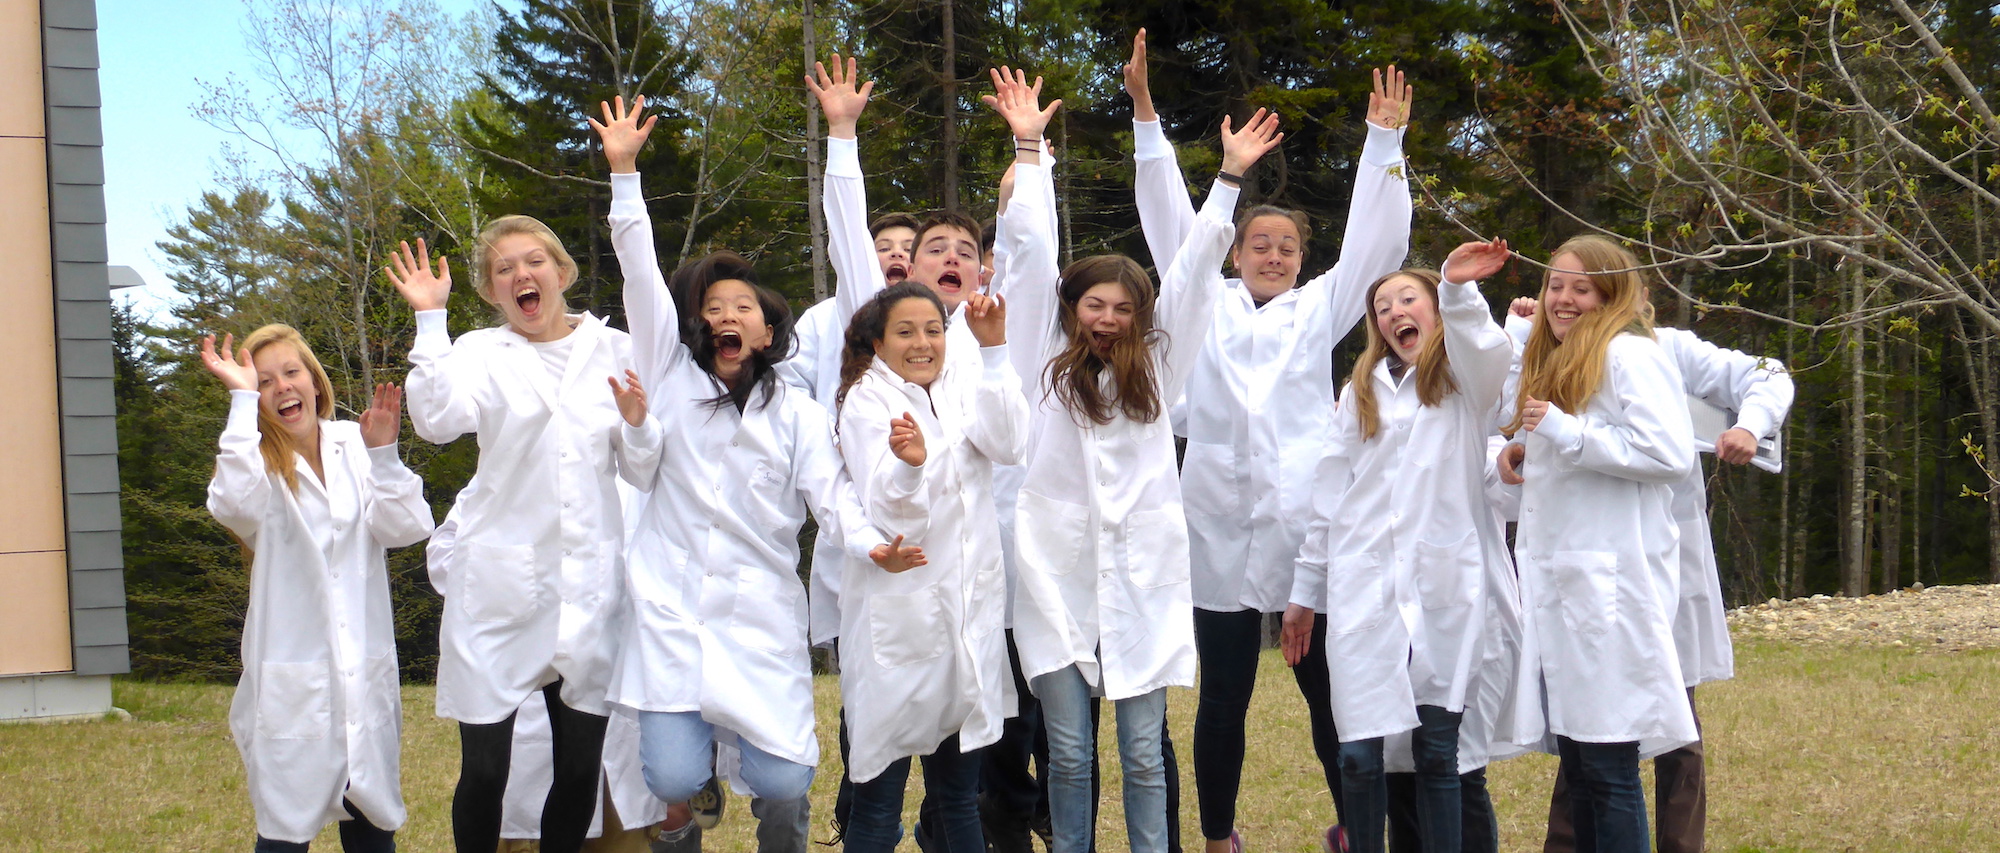 Students outside with lab coats on and hands in the air.